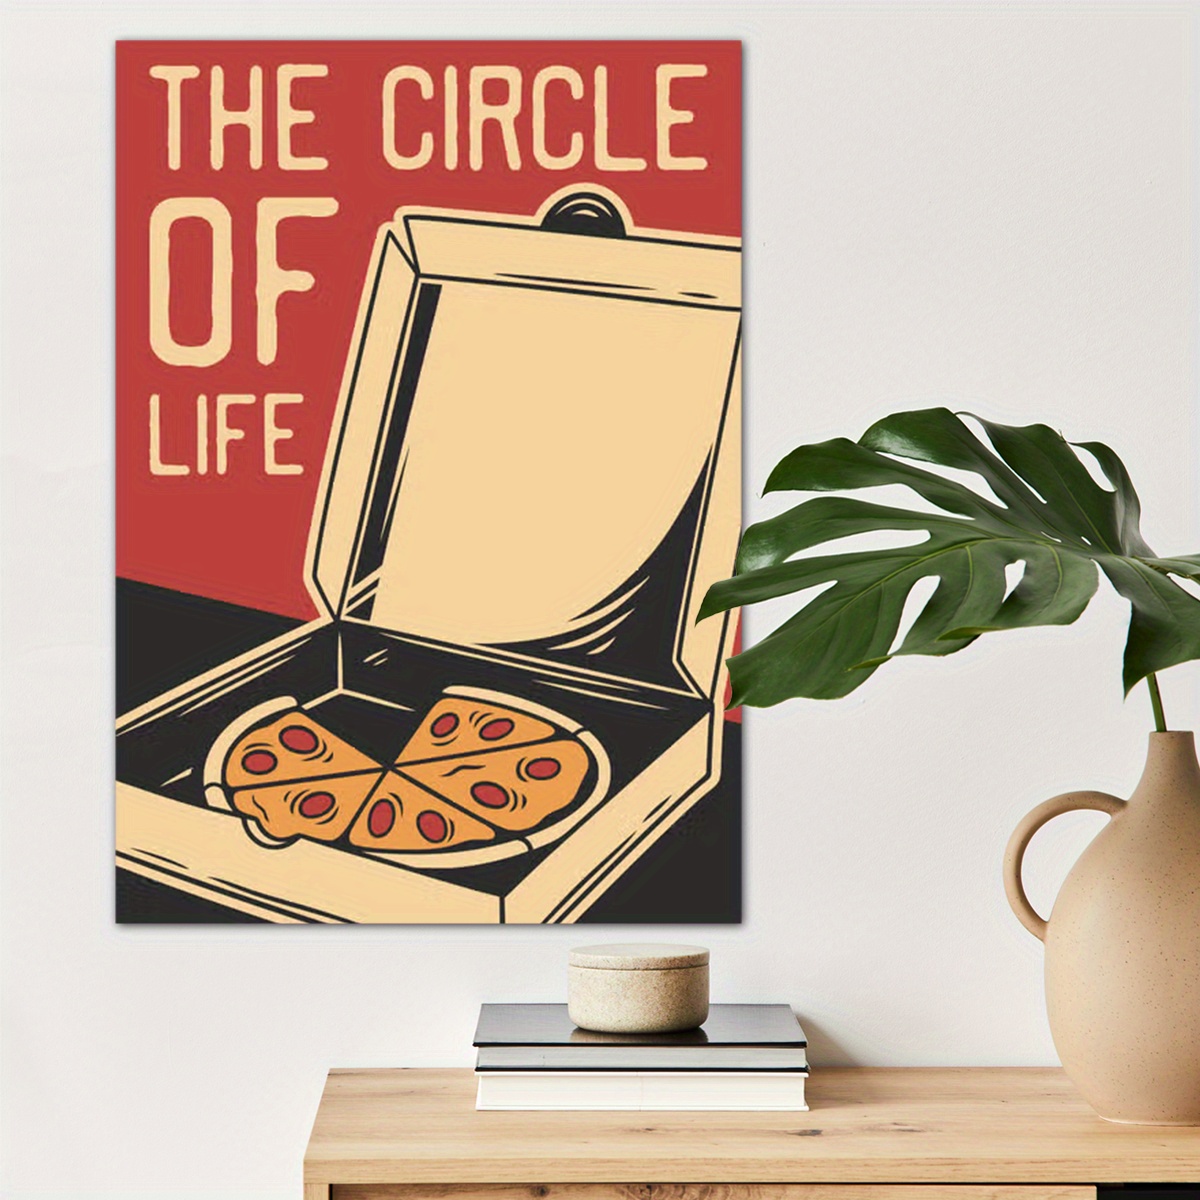 

1pc Circle Of Life Pizza Poster Canvas Wall Art For Home Decor, Food Lovers Poster Wall Decor High Quality Canvas Prints For Living Room Bedroom Kitchen Office Cafe Decor, Perfect Gift And Decoration